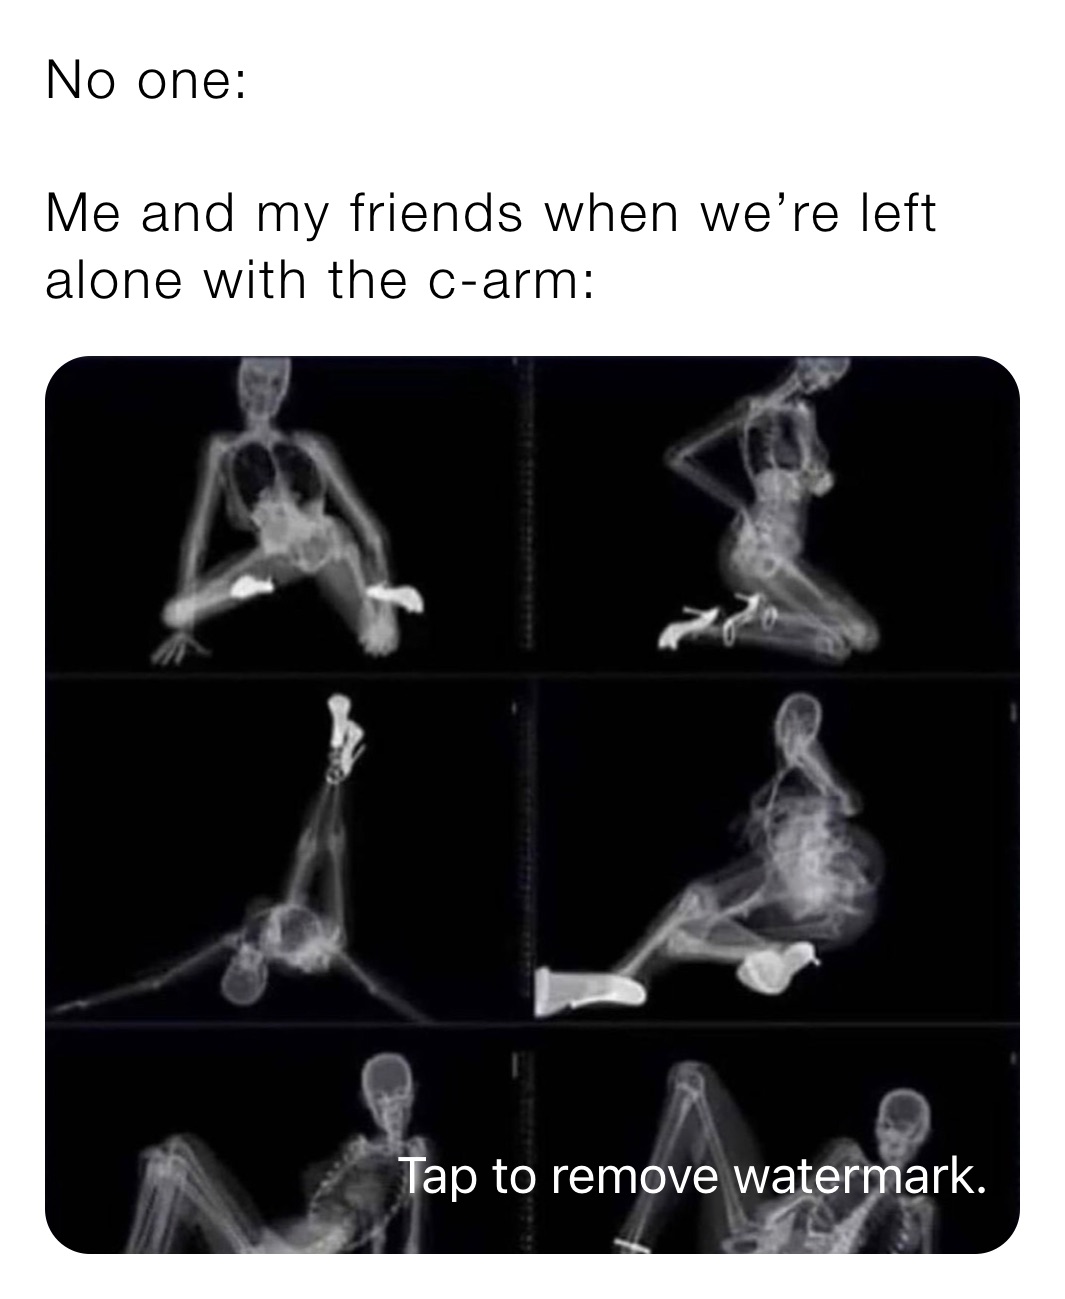 No one:

Me and my friends when we’re left alone with the c-arm: